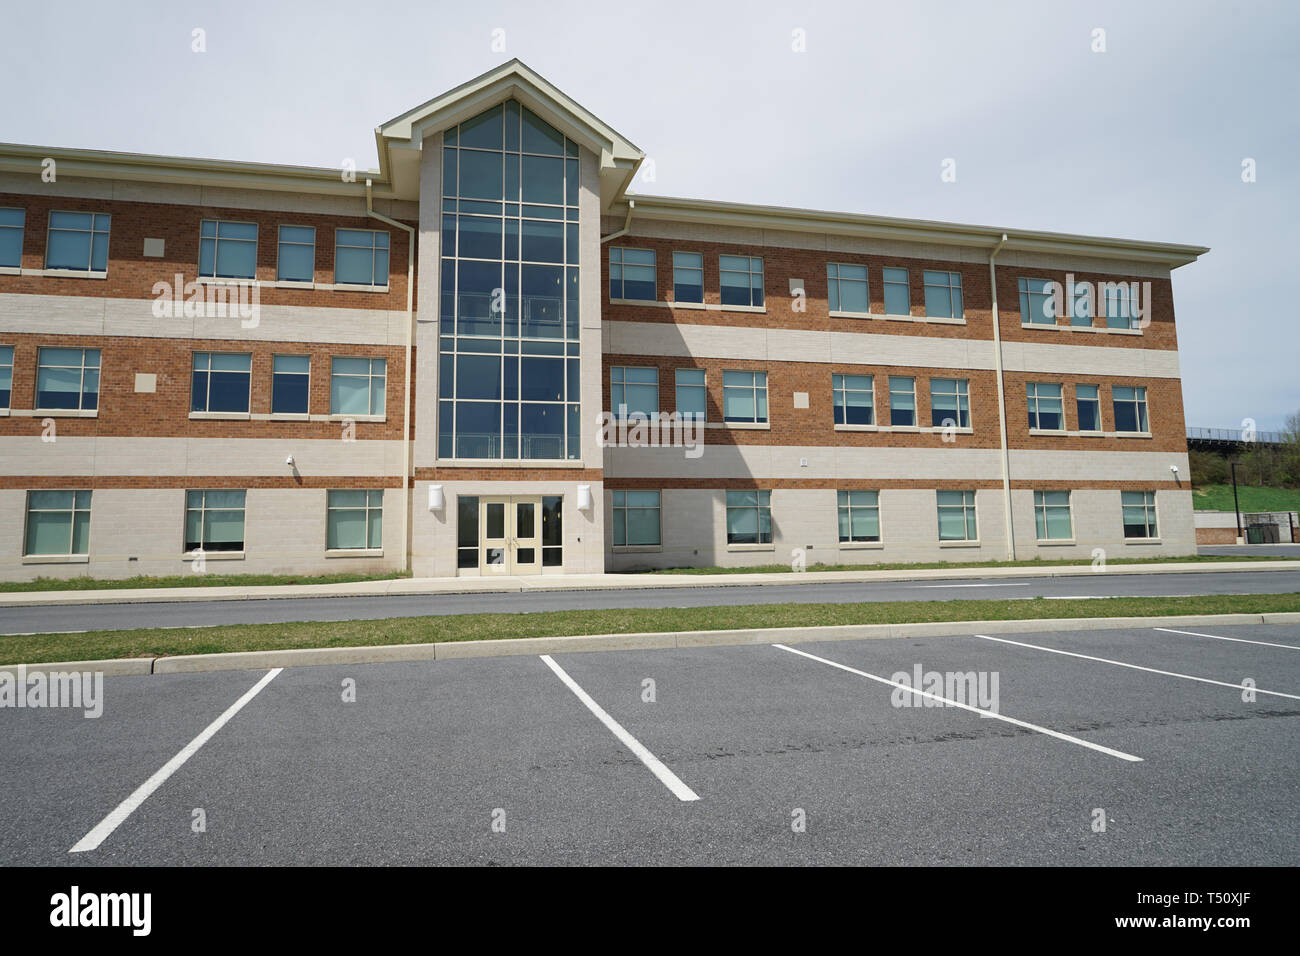 Exterior view of a large modern school.  There are double doors and many windows.  This is Northampton Area Middle School. Stock Photo